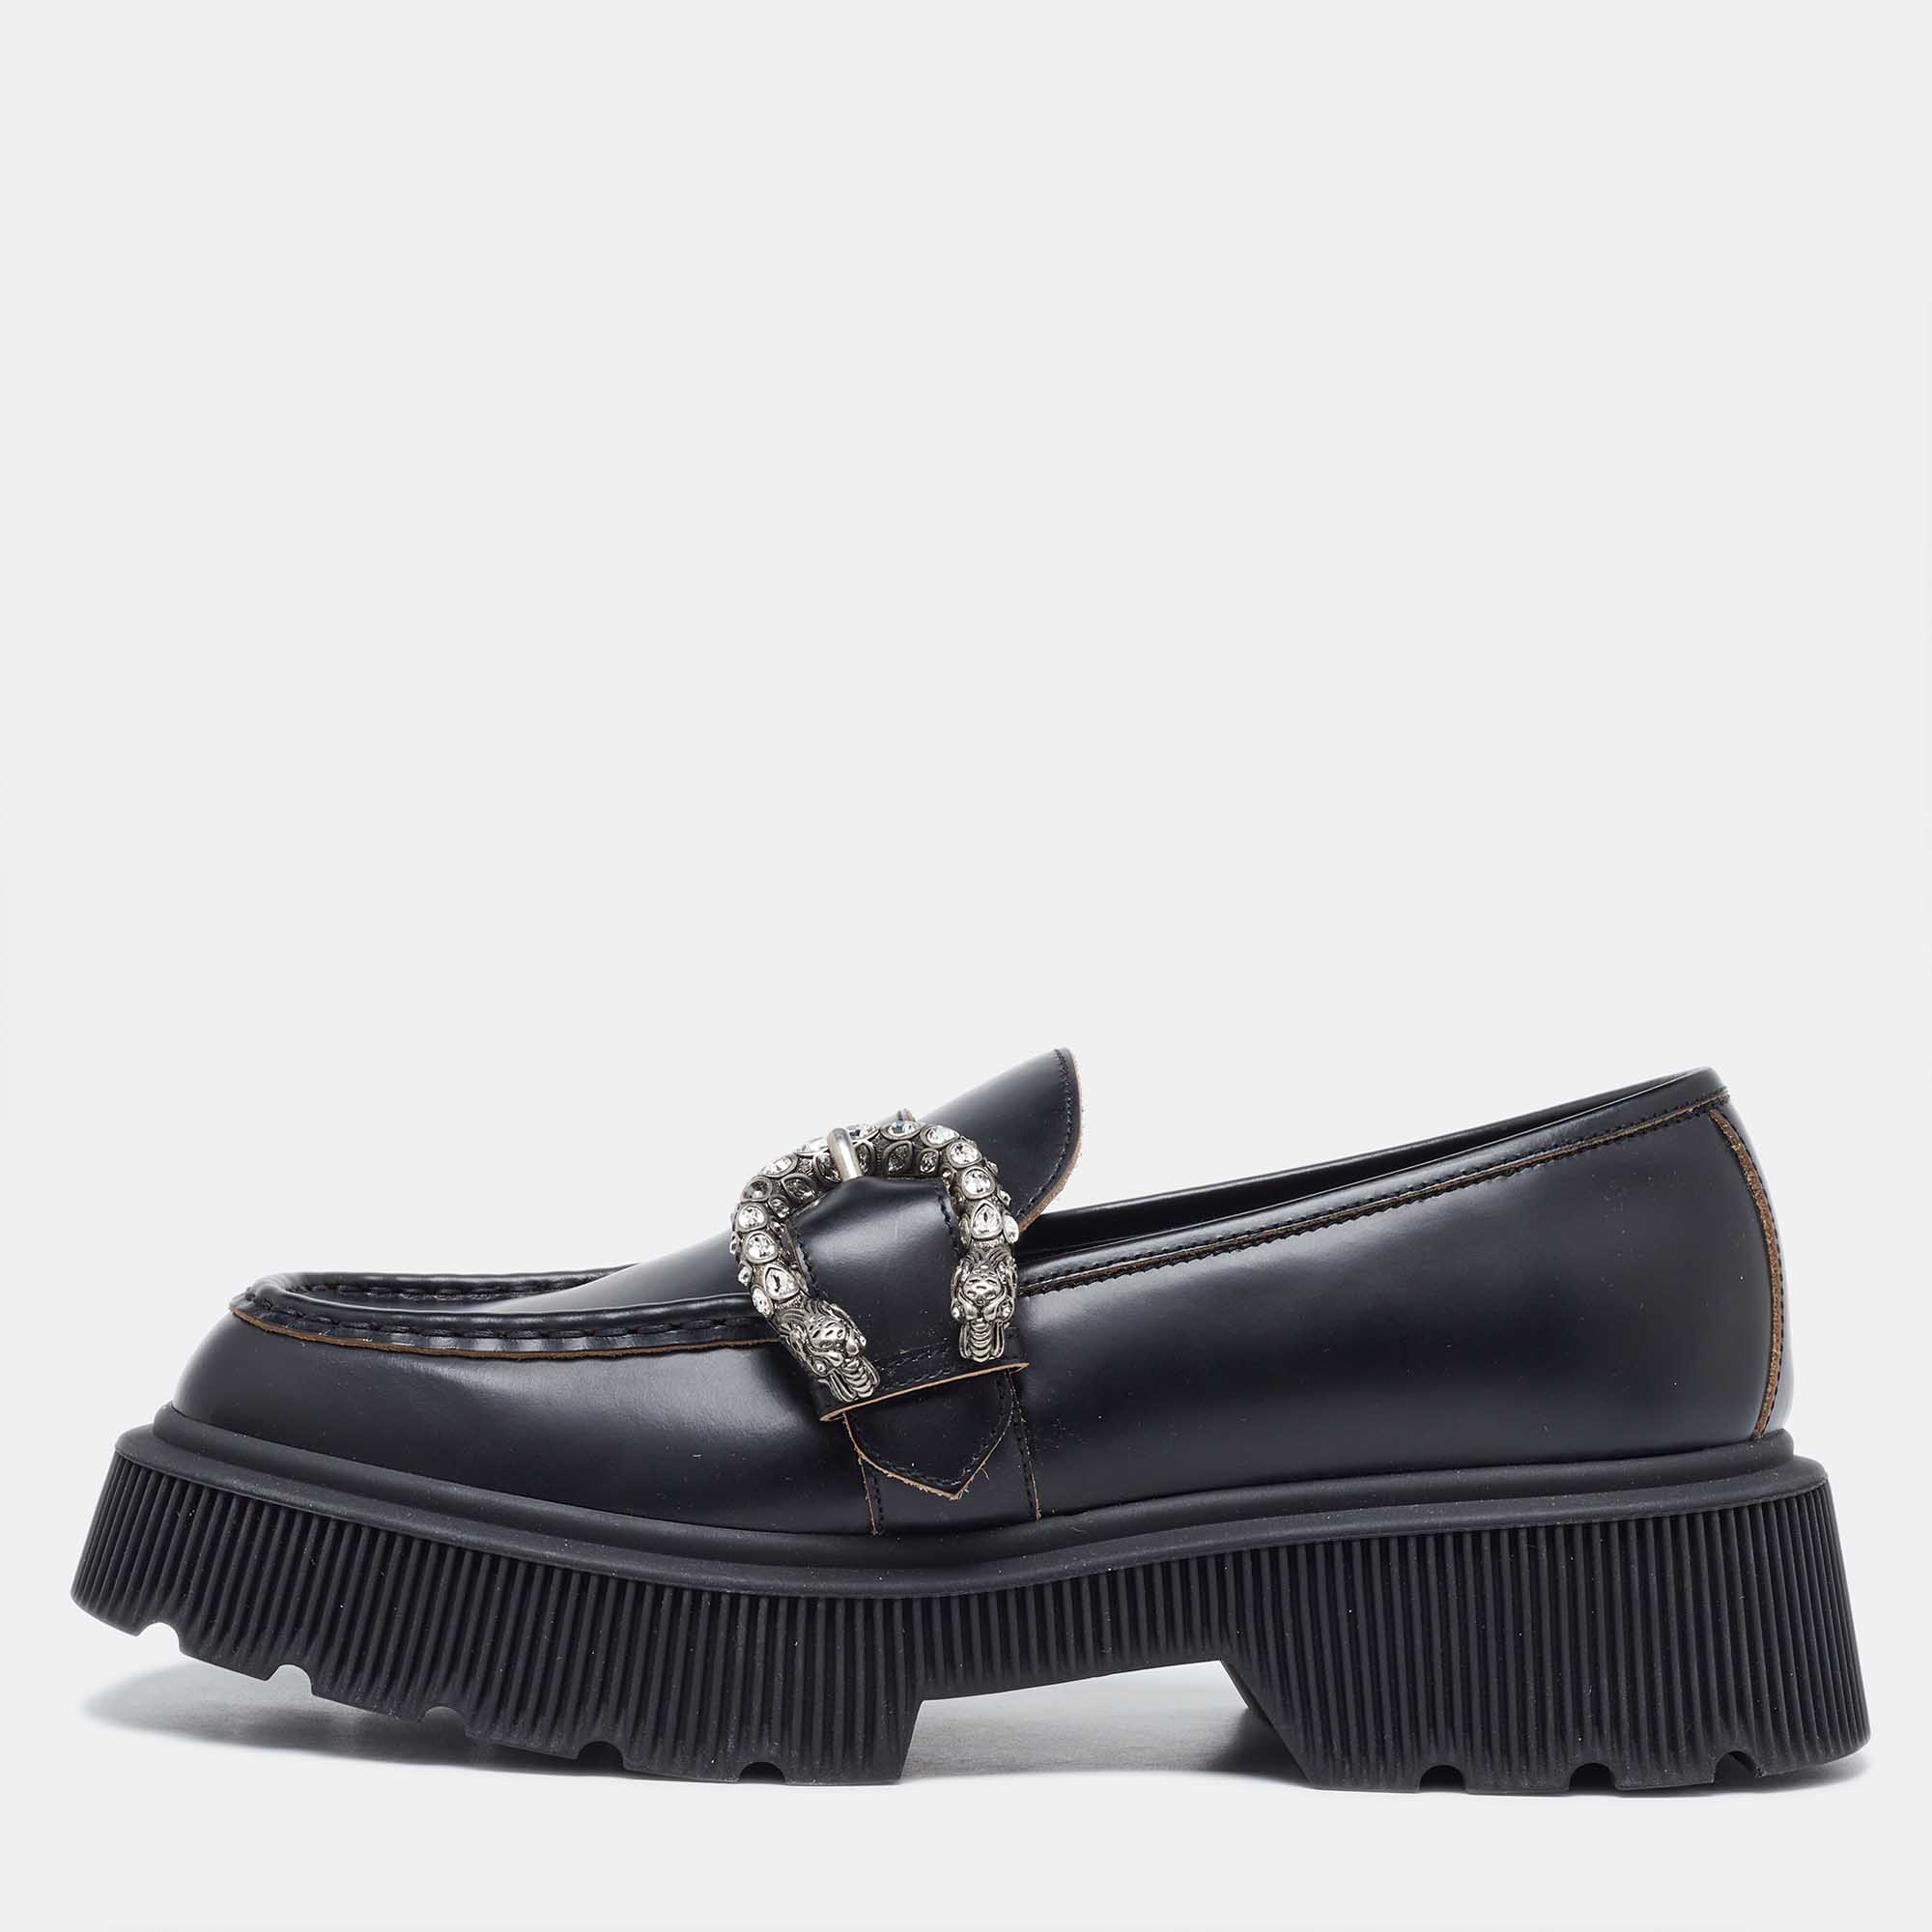 Gucci black leather dionysus accent platform loafers size 40